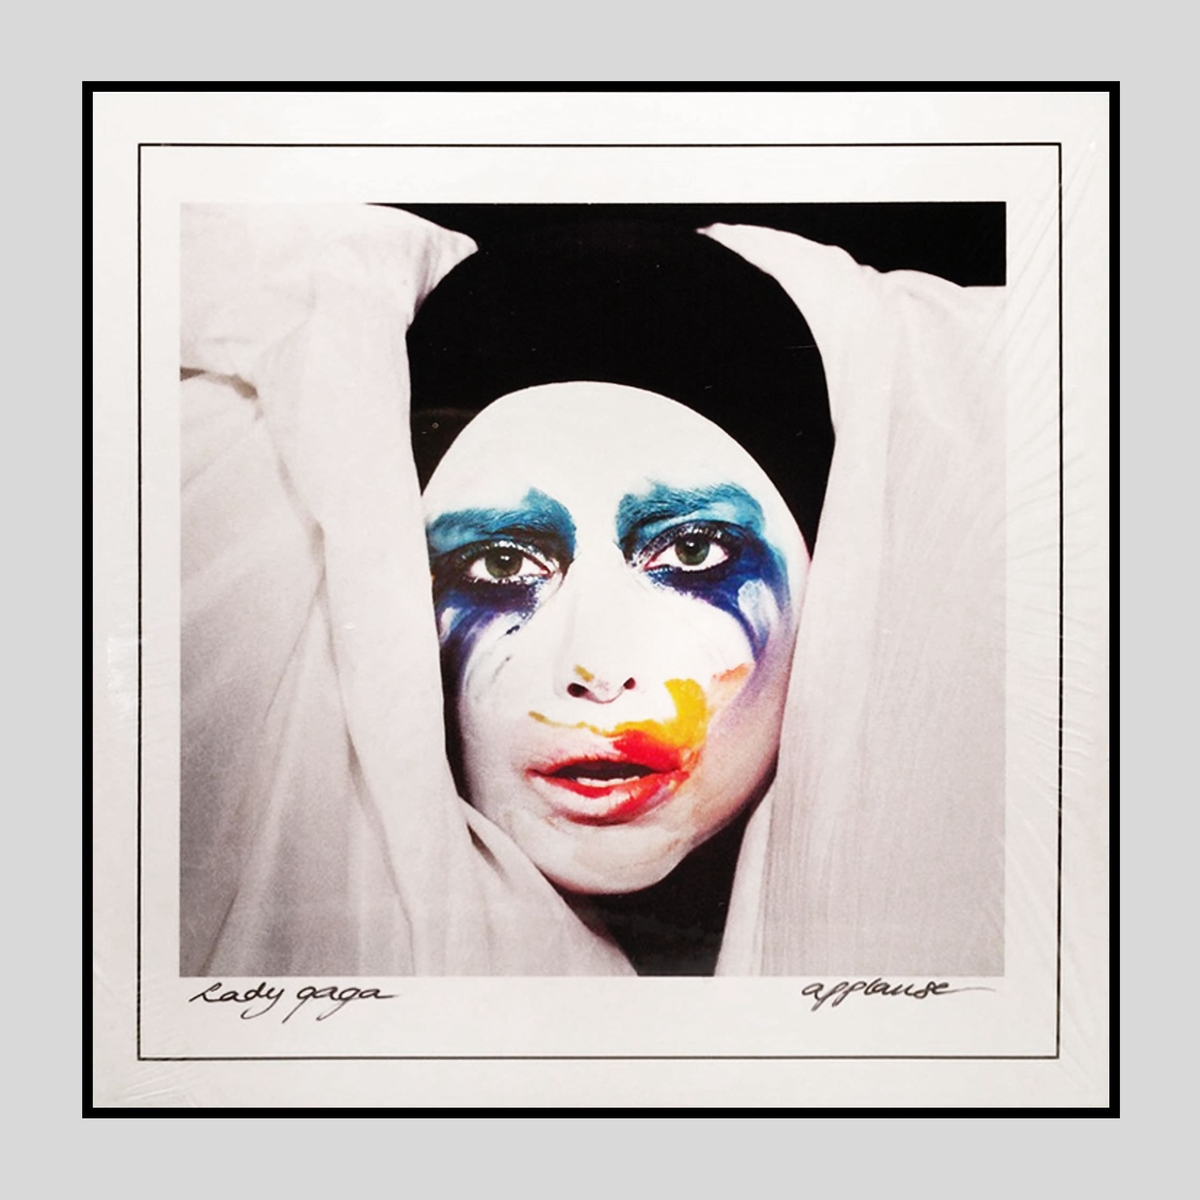 Applause (French Cardsleeve)